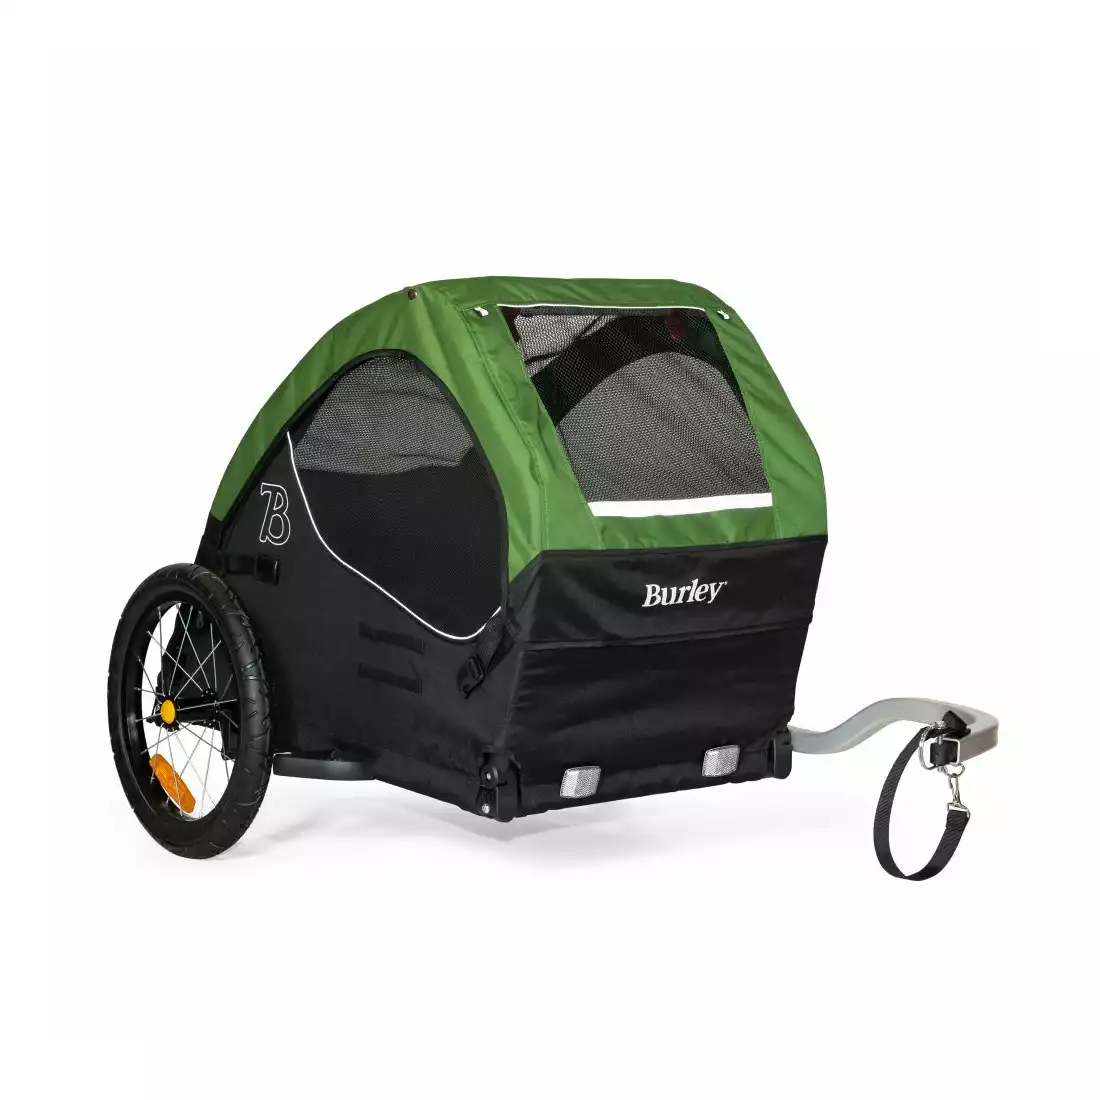 BURLEY TAIL WAGON Bicycle trailer for dogs, green